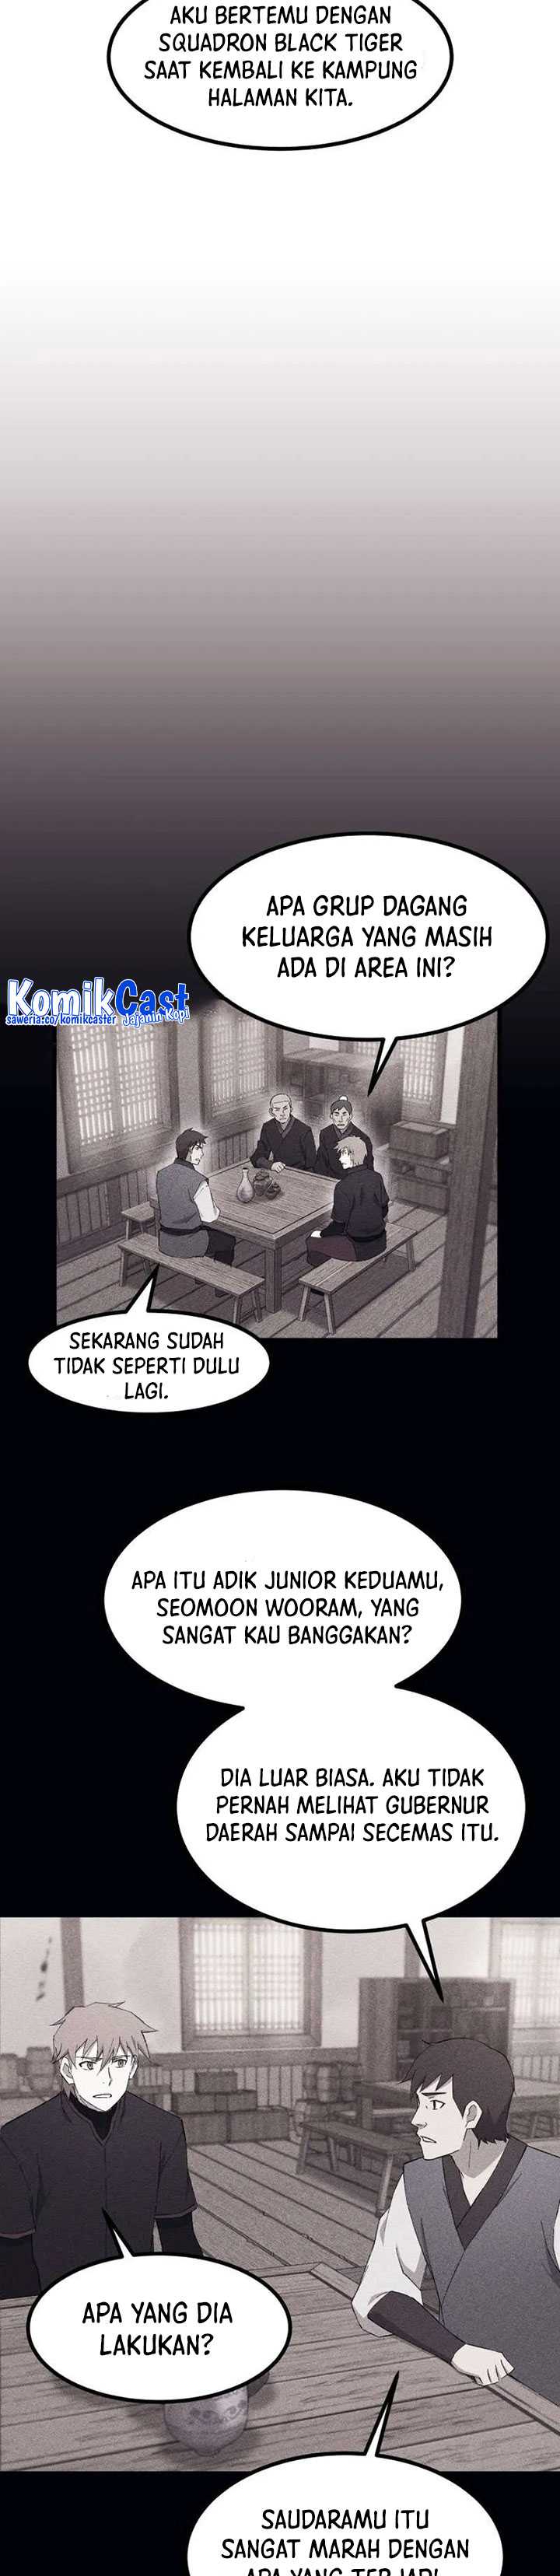 The Great Master Chapter 84